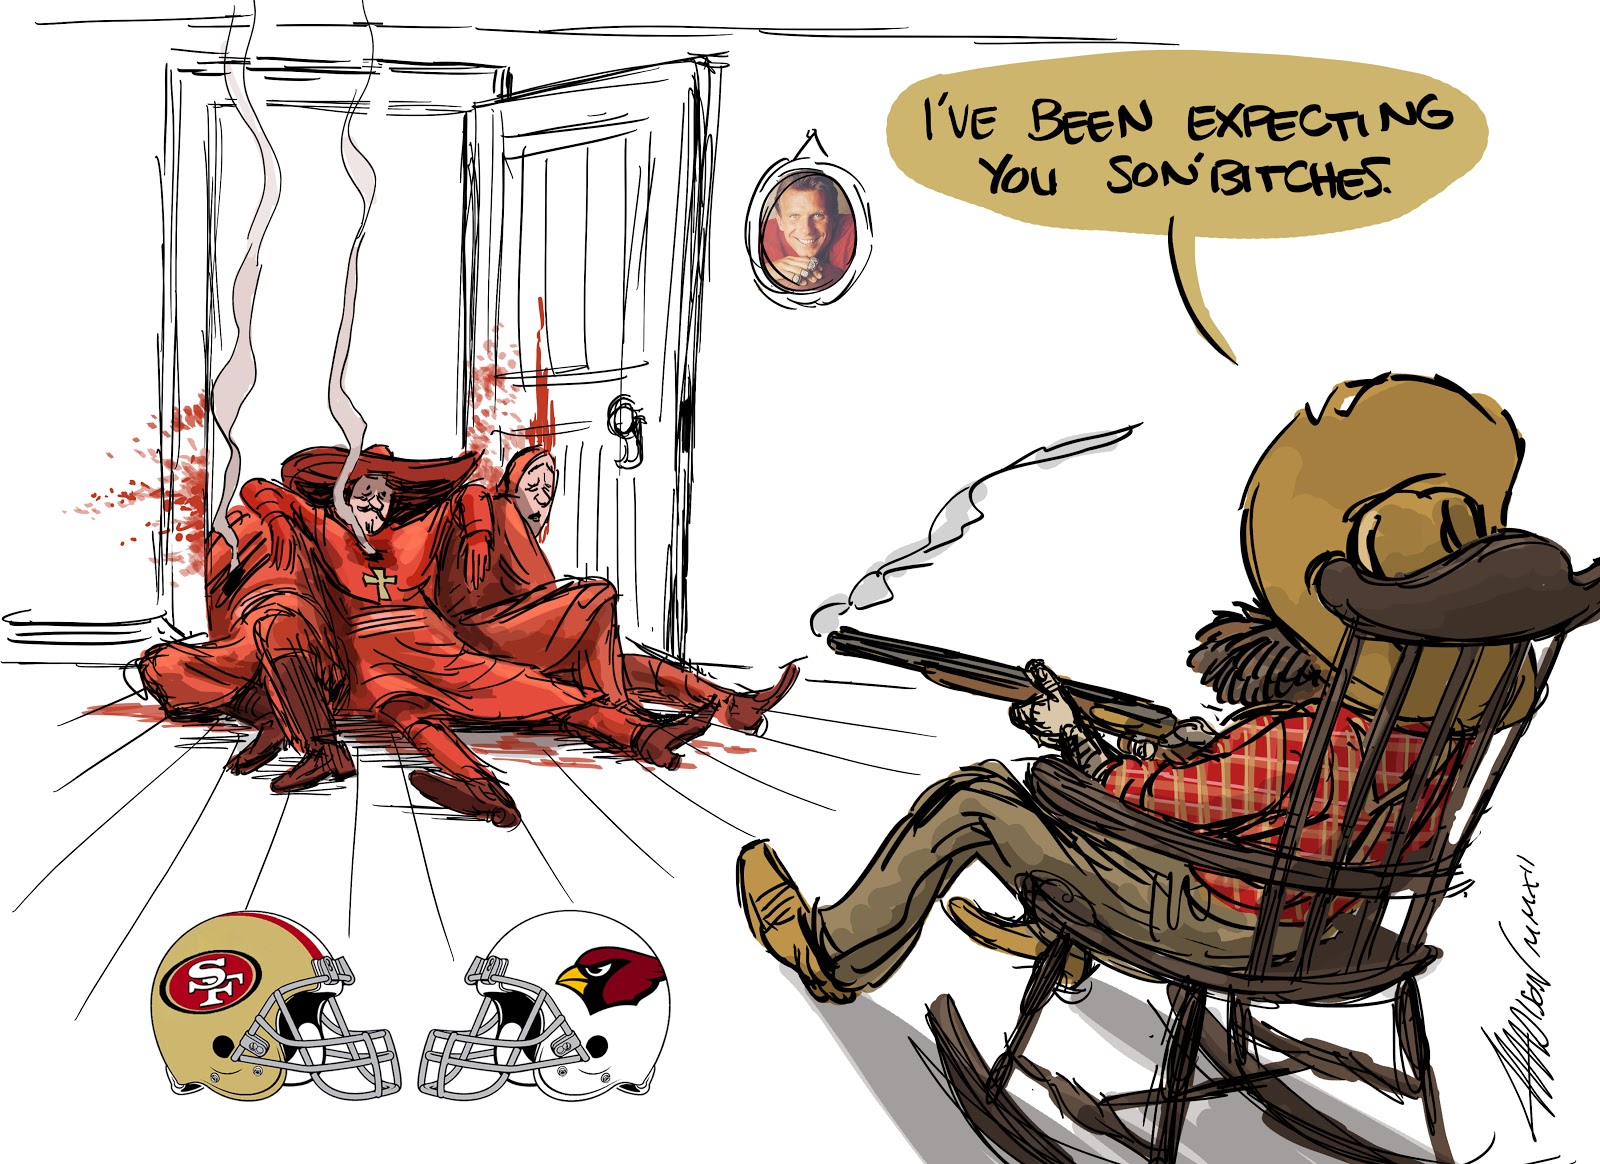 49ers vs. Cardinals, and an awesome Monty Python reference.